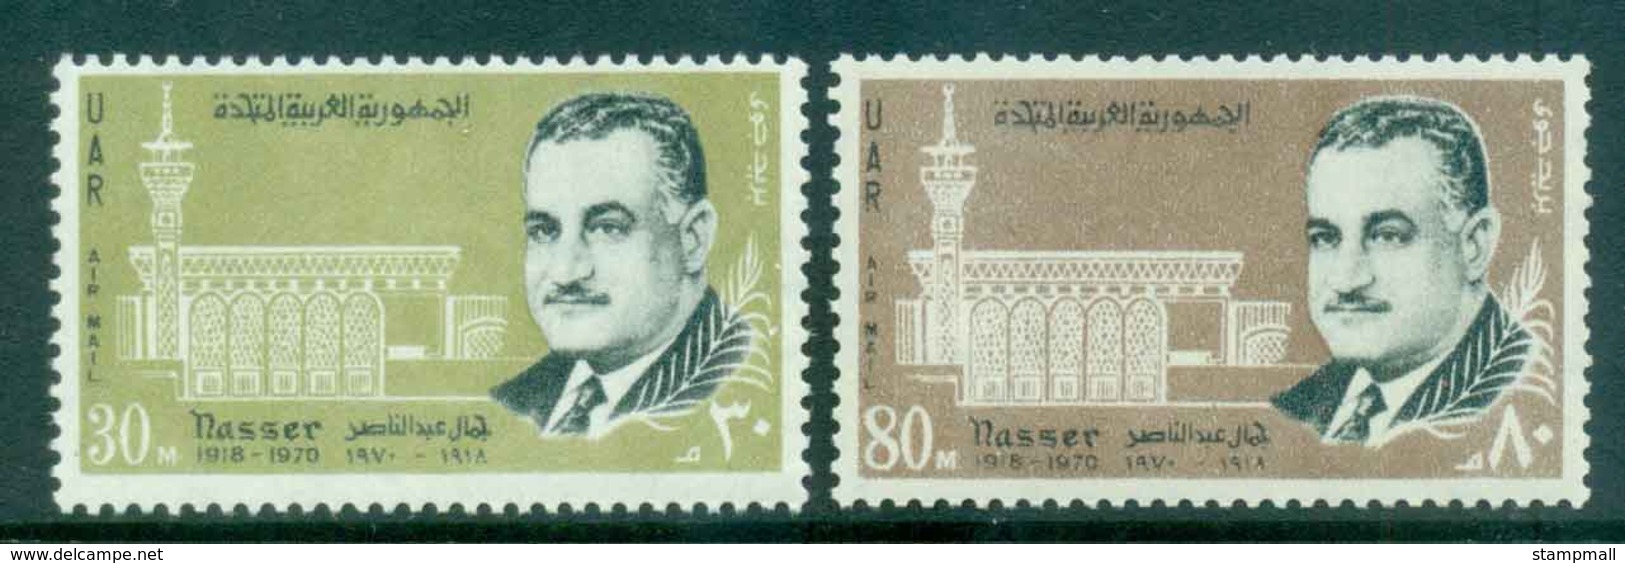 Egypt 1970 Nasser & Burial Mosque MUH Lot49893 - Used Stamps